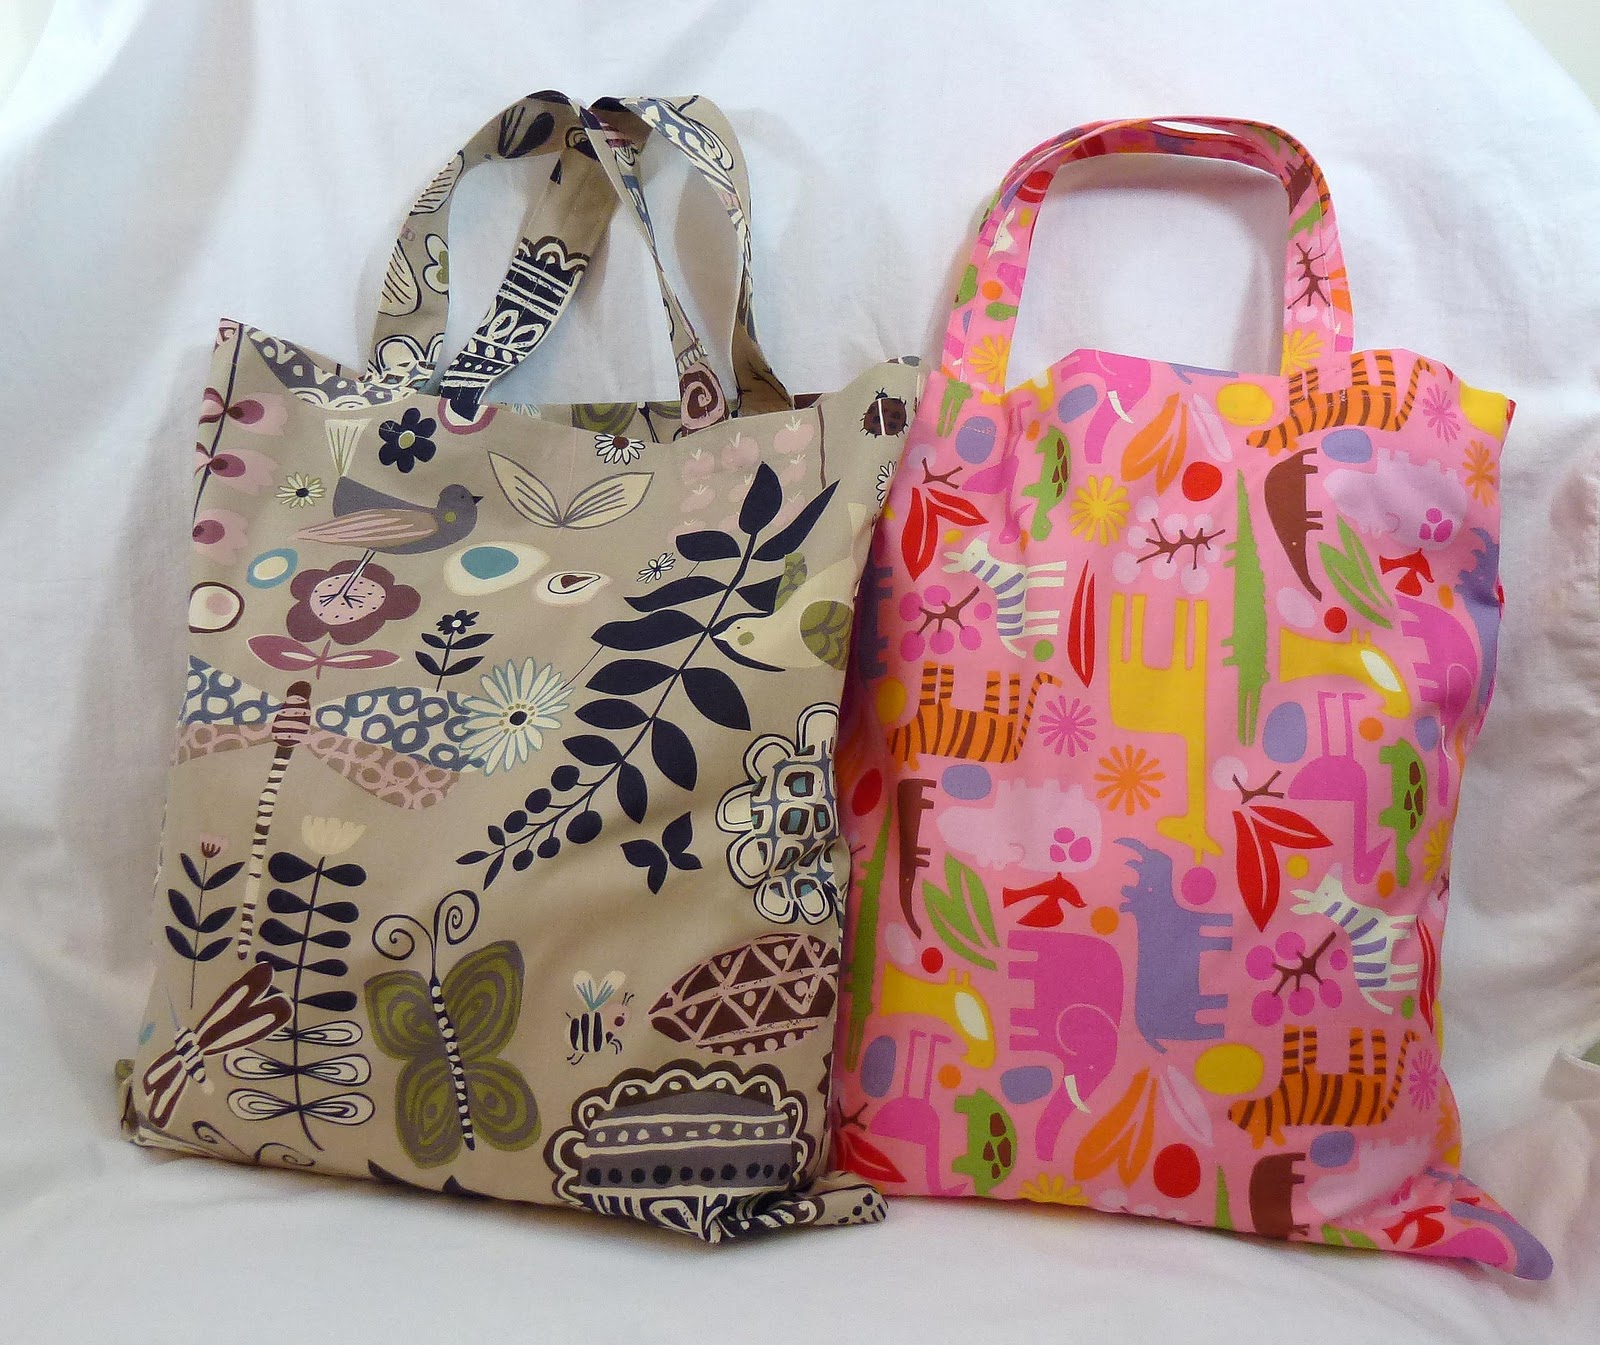 Leslie's Art and Sew: Introducing...The Morsbag!